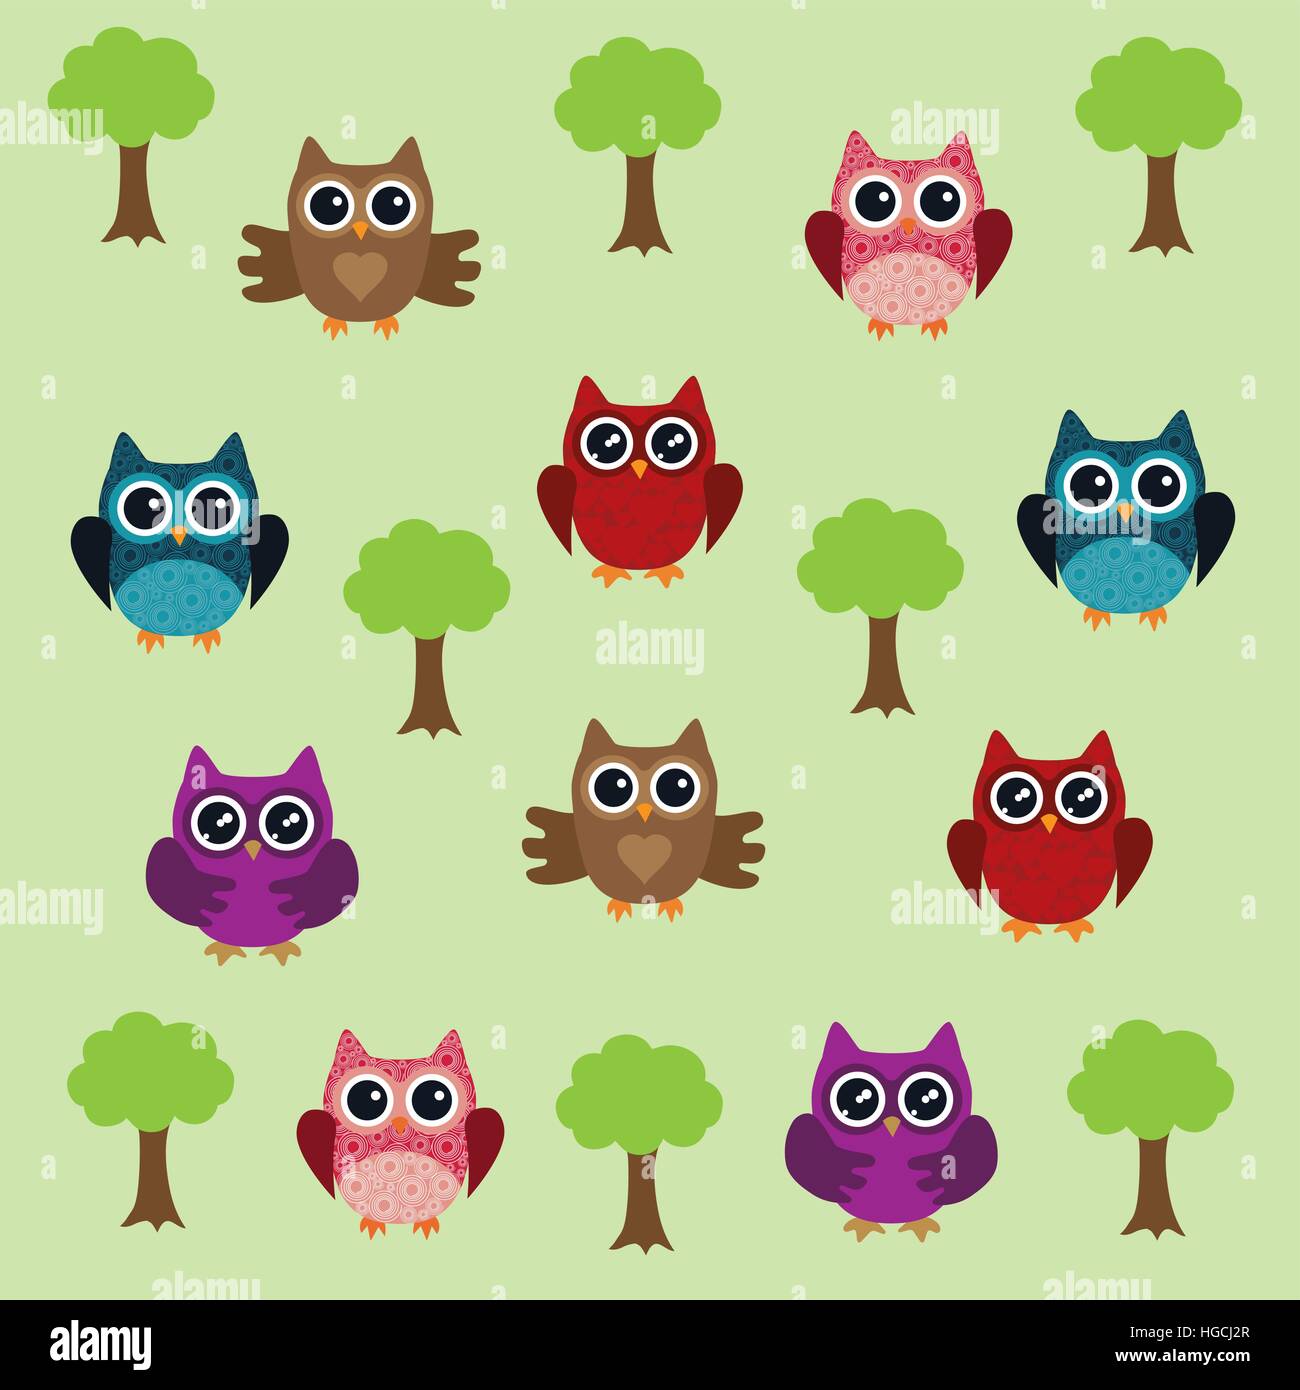 vector illustration of fun owls and trees background Stock Vector